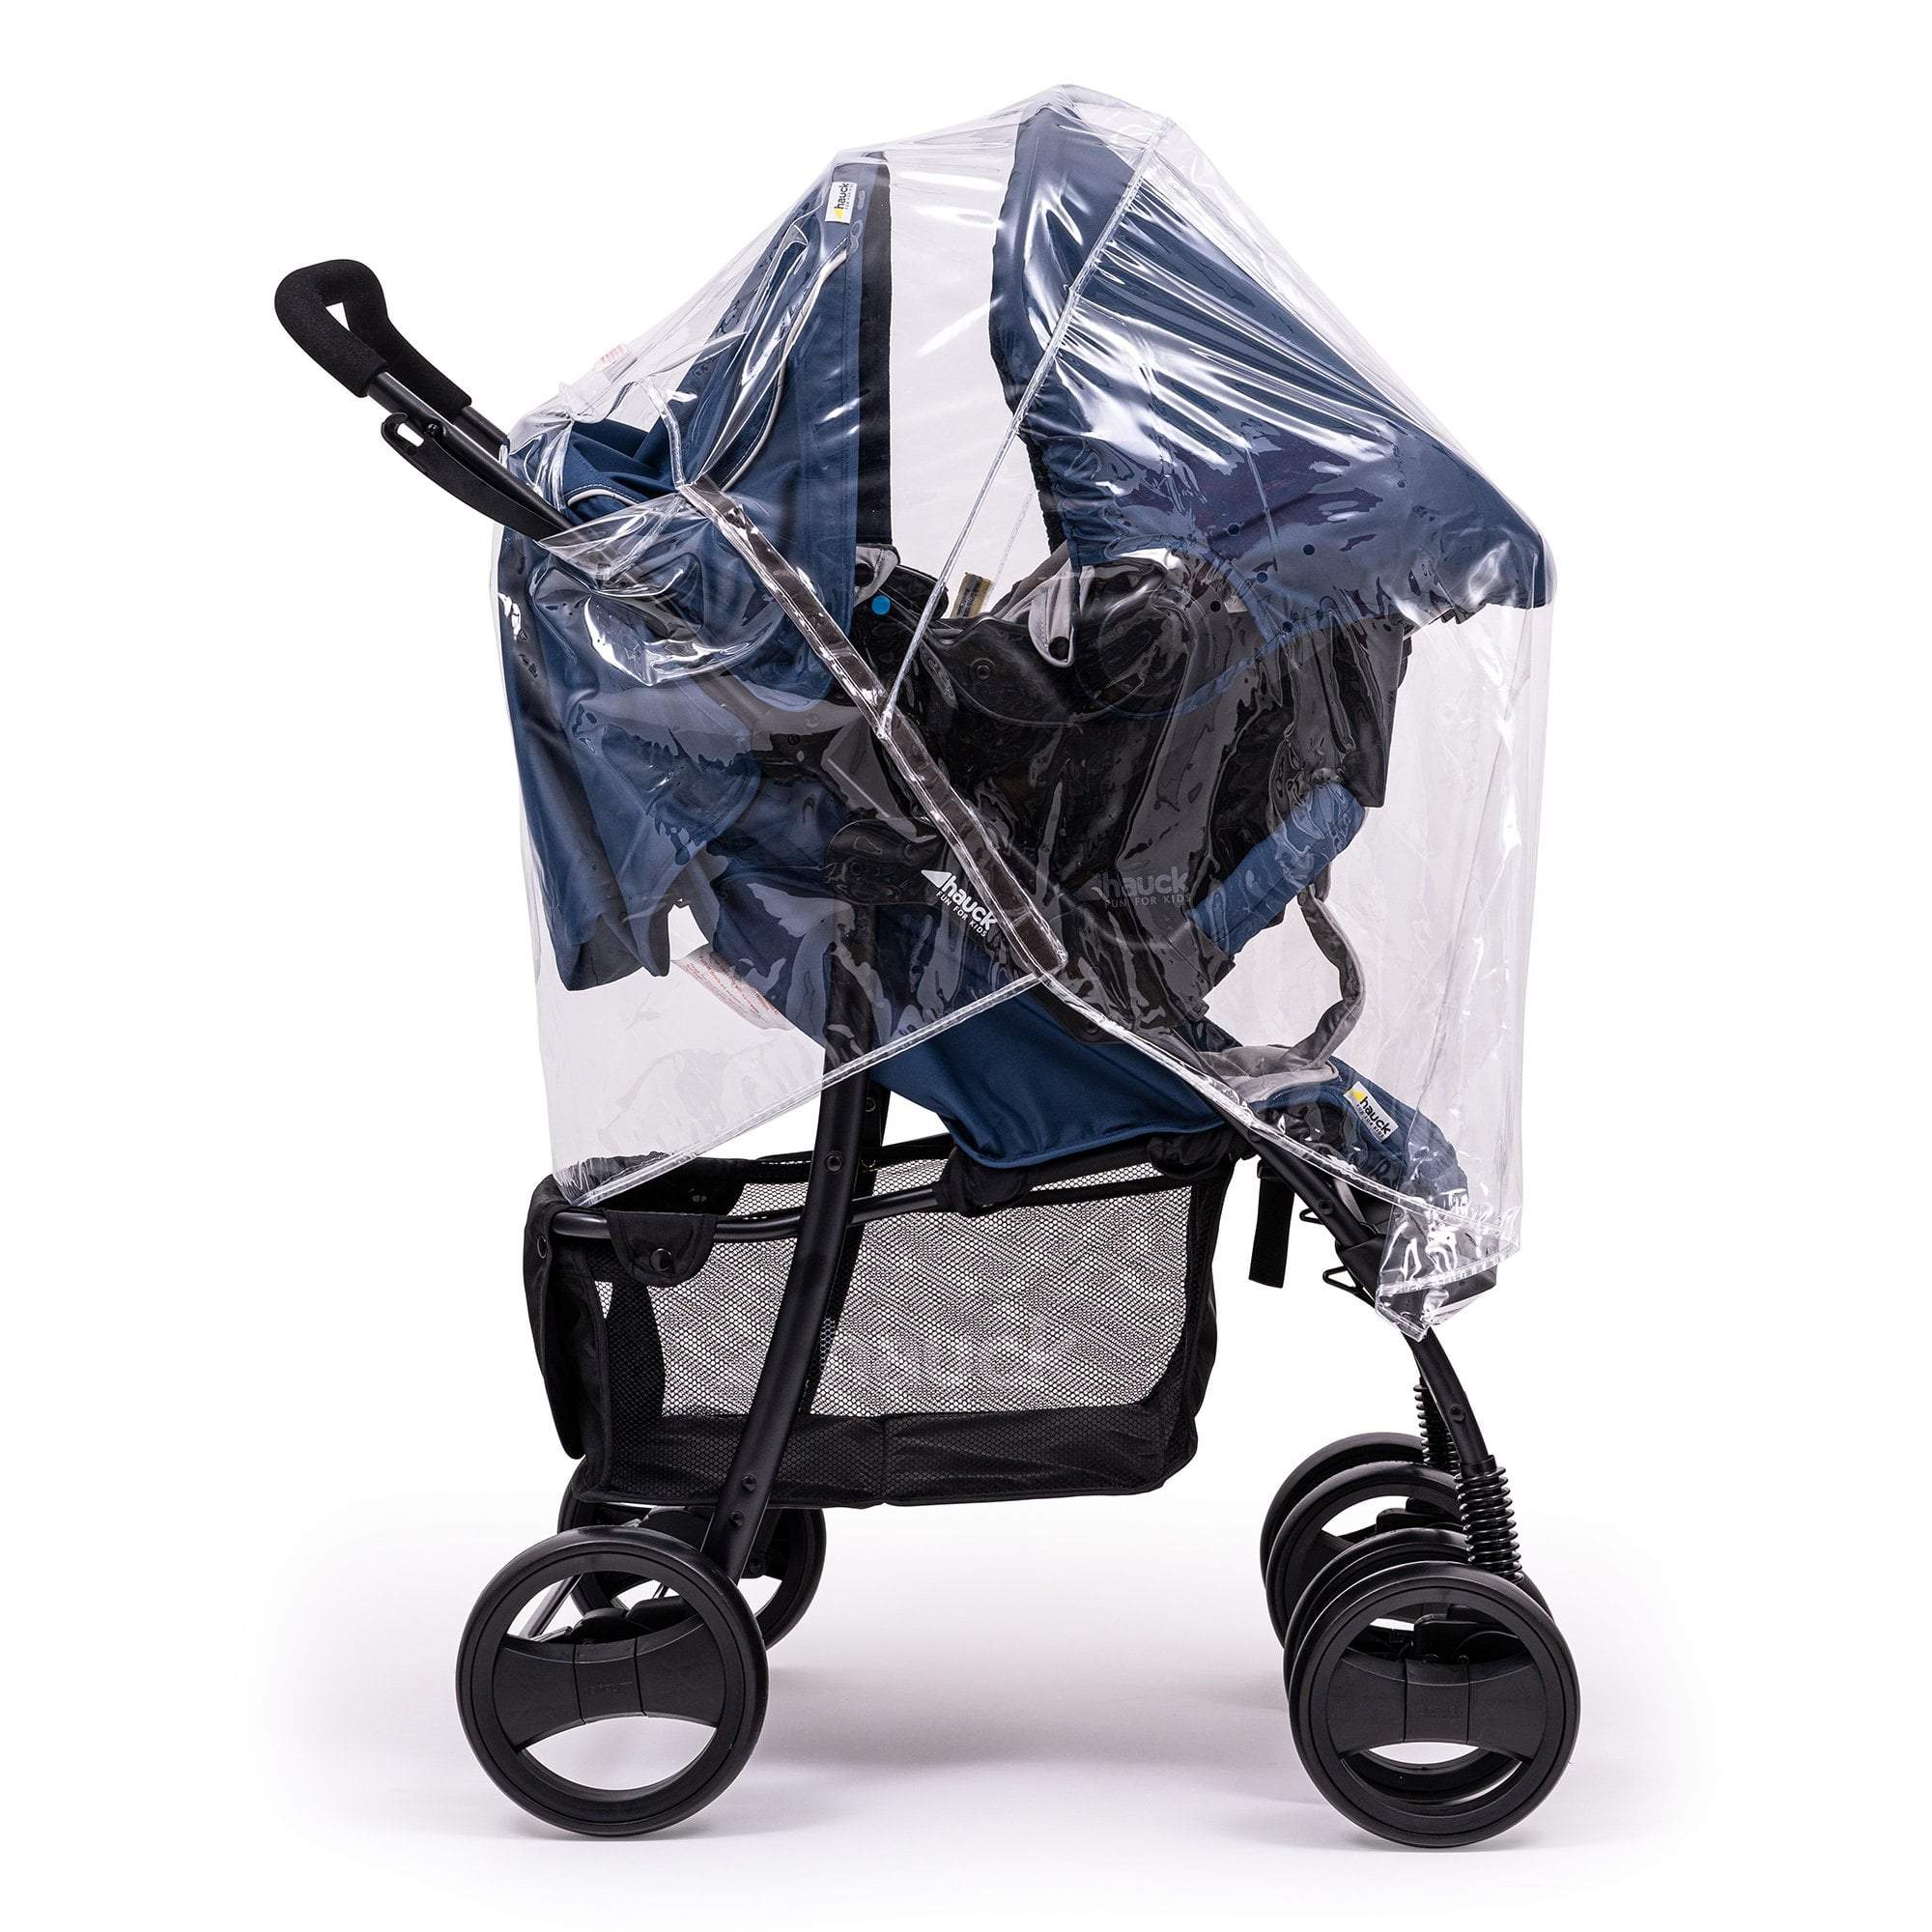 Travel System Raincover Compatible with Petite Star - Fits All Models -  | For Your Little One